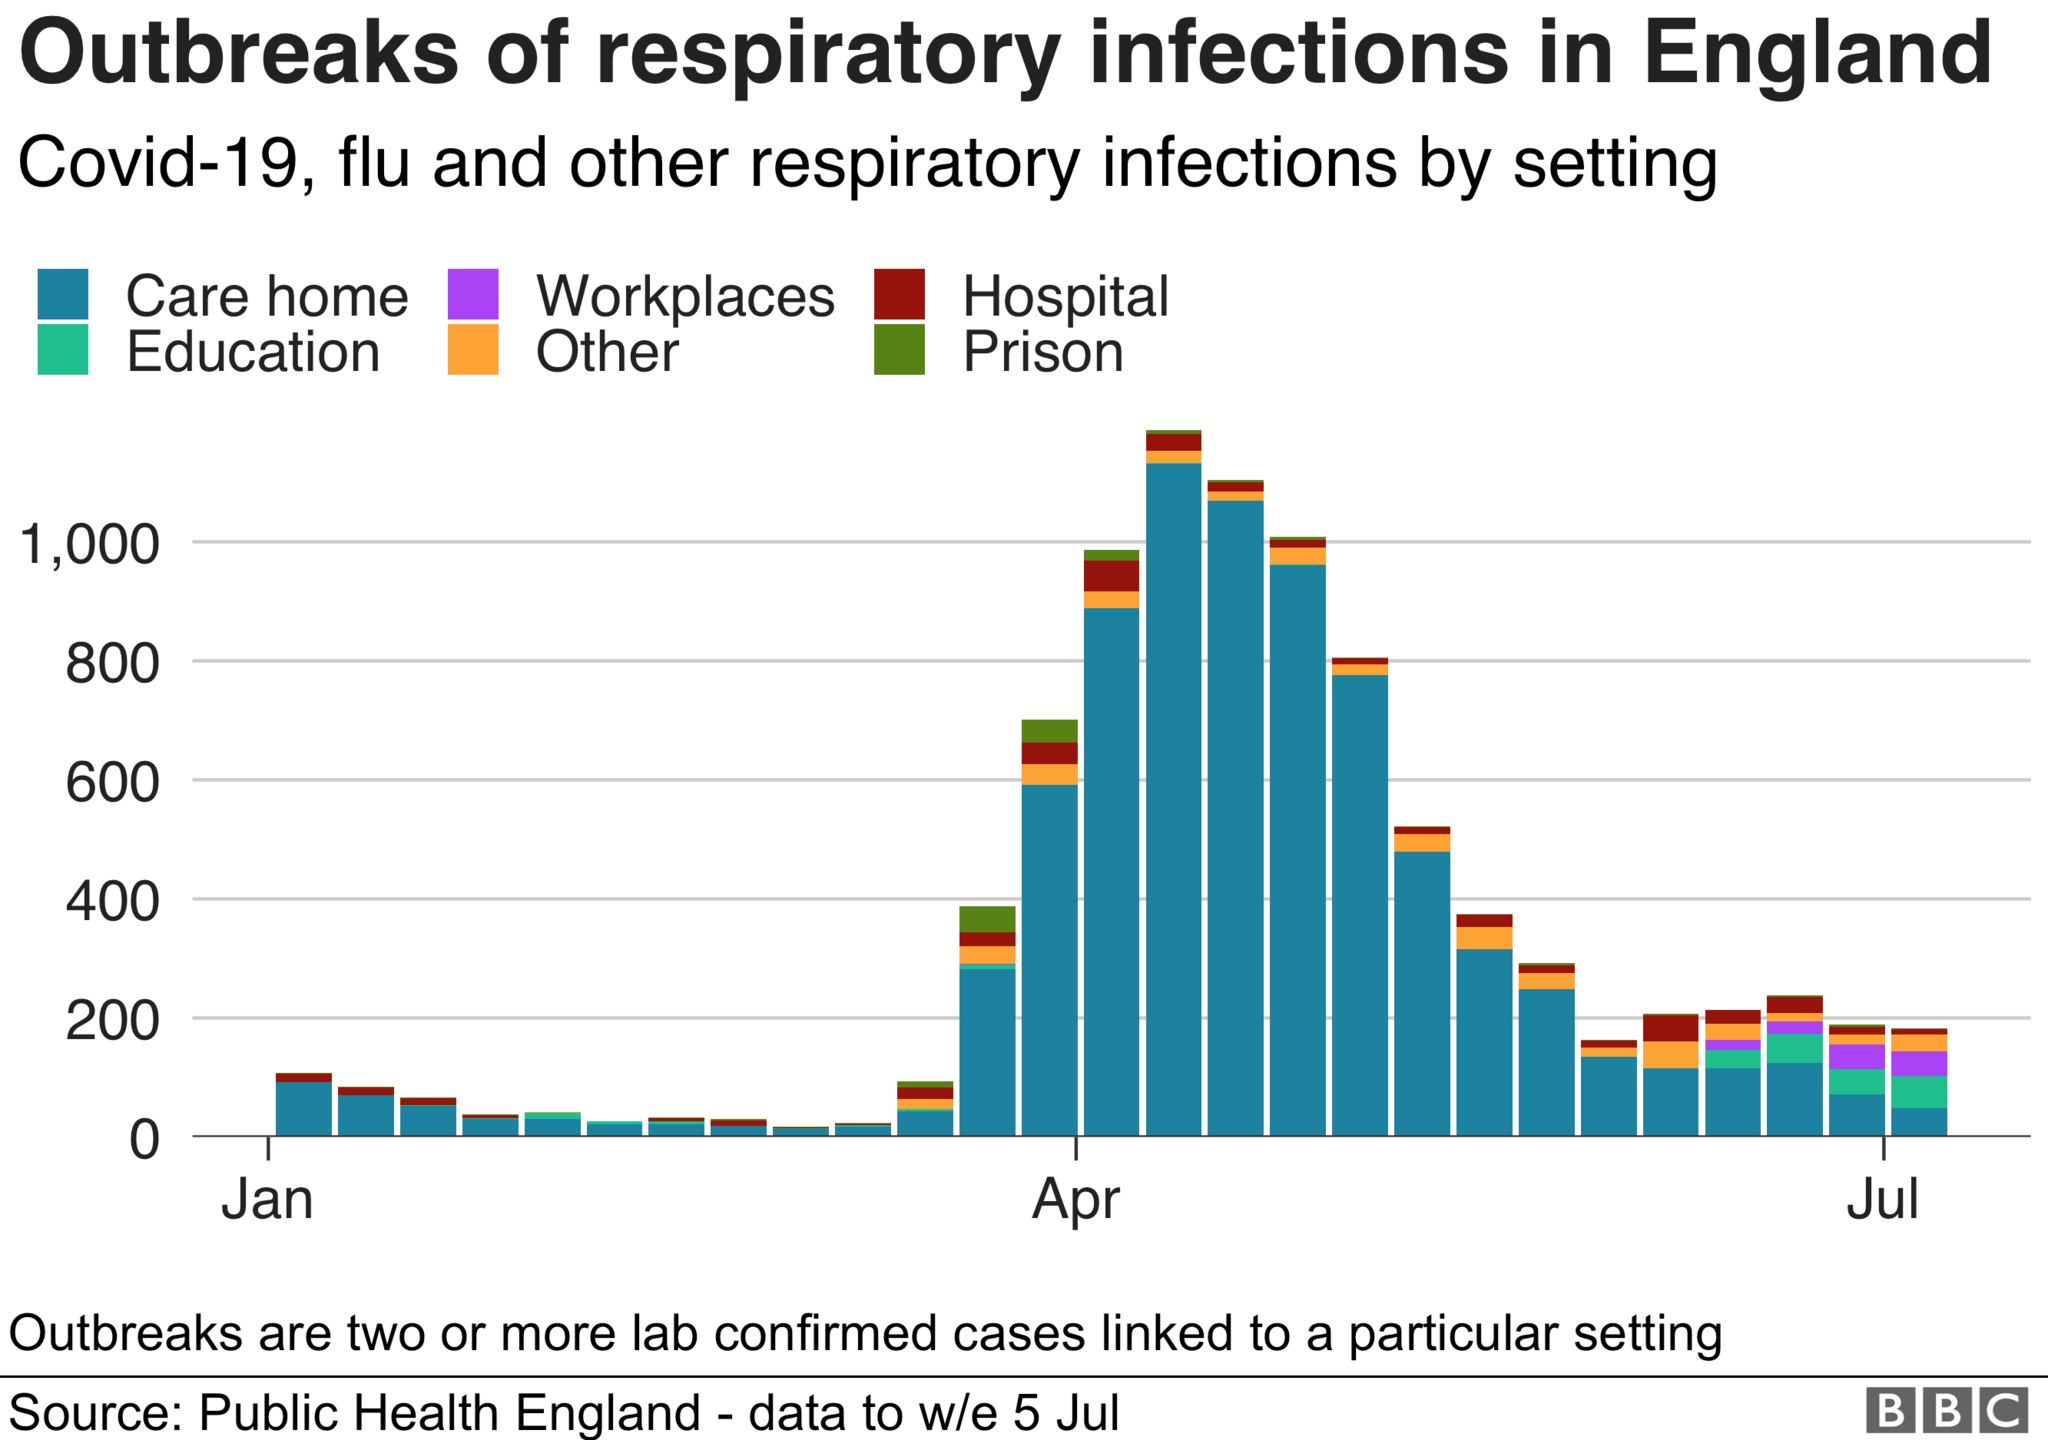 Chart showing outbreaks of respiratory infections in England since January